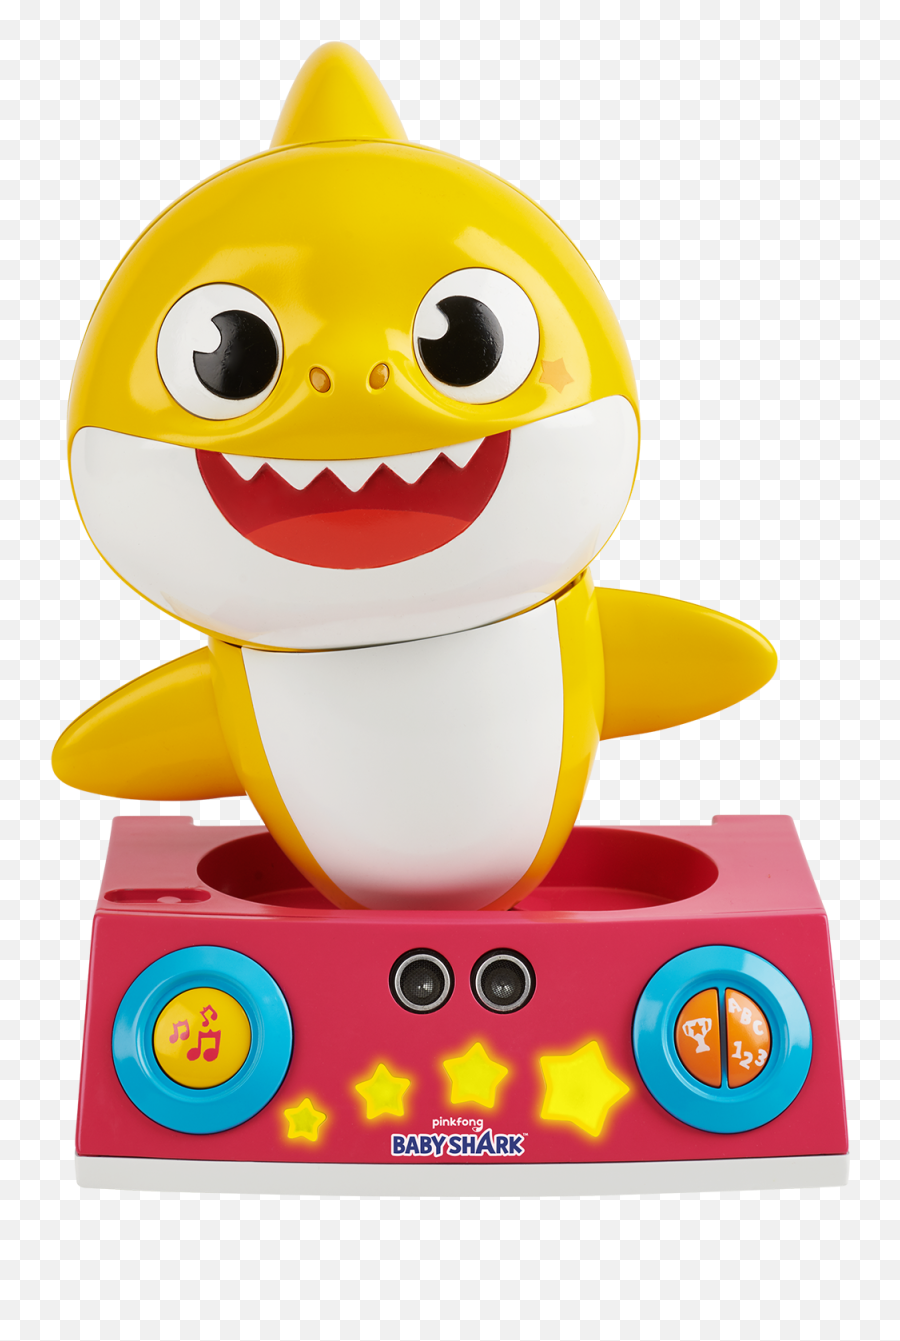 Pinkfong Baby Shark Toys By Wowwee - Baby Shark Singing Toys Emoji,Emoticon Pillow Philippines